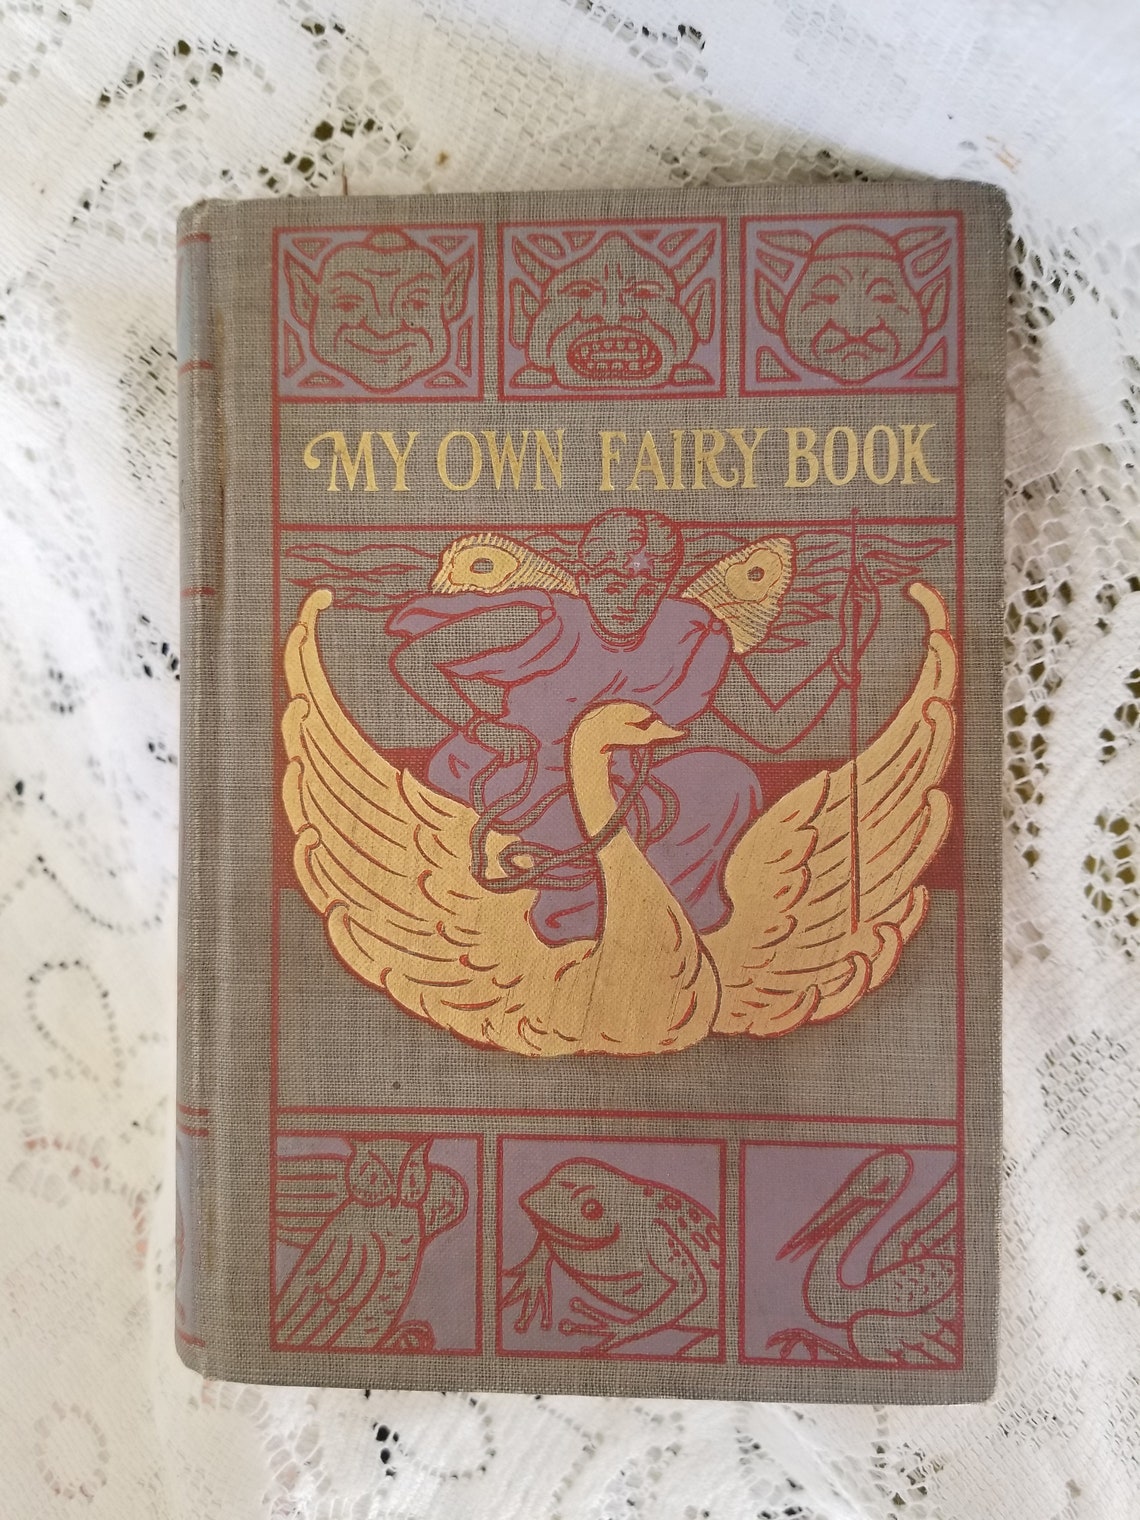 My Own Fairy Book Antique Fairy Tale Story Book by Andrew - Etsy